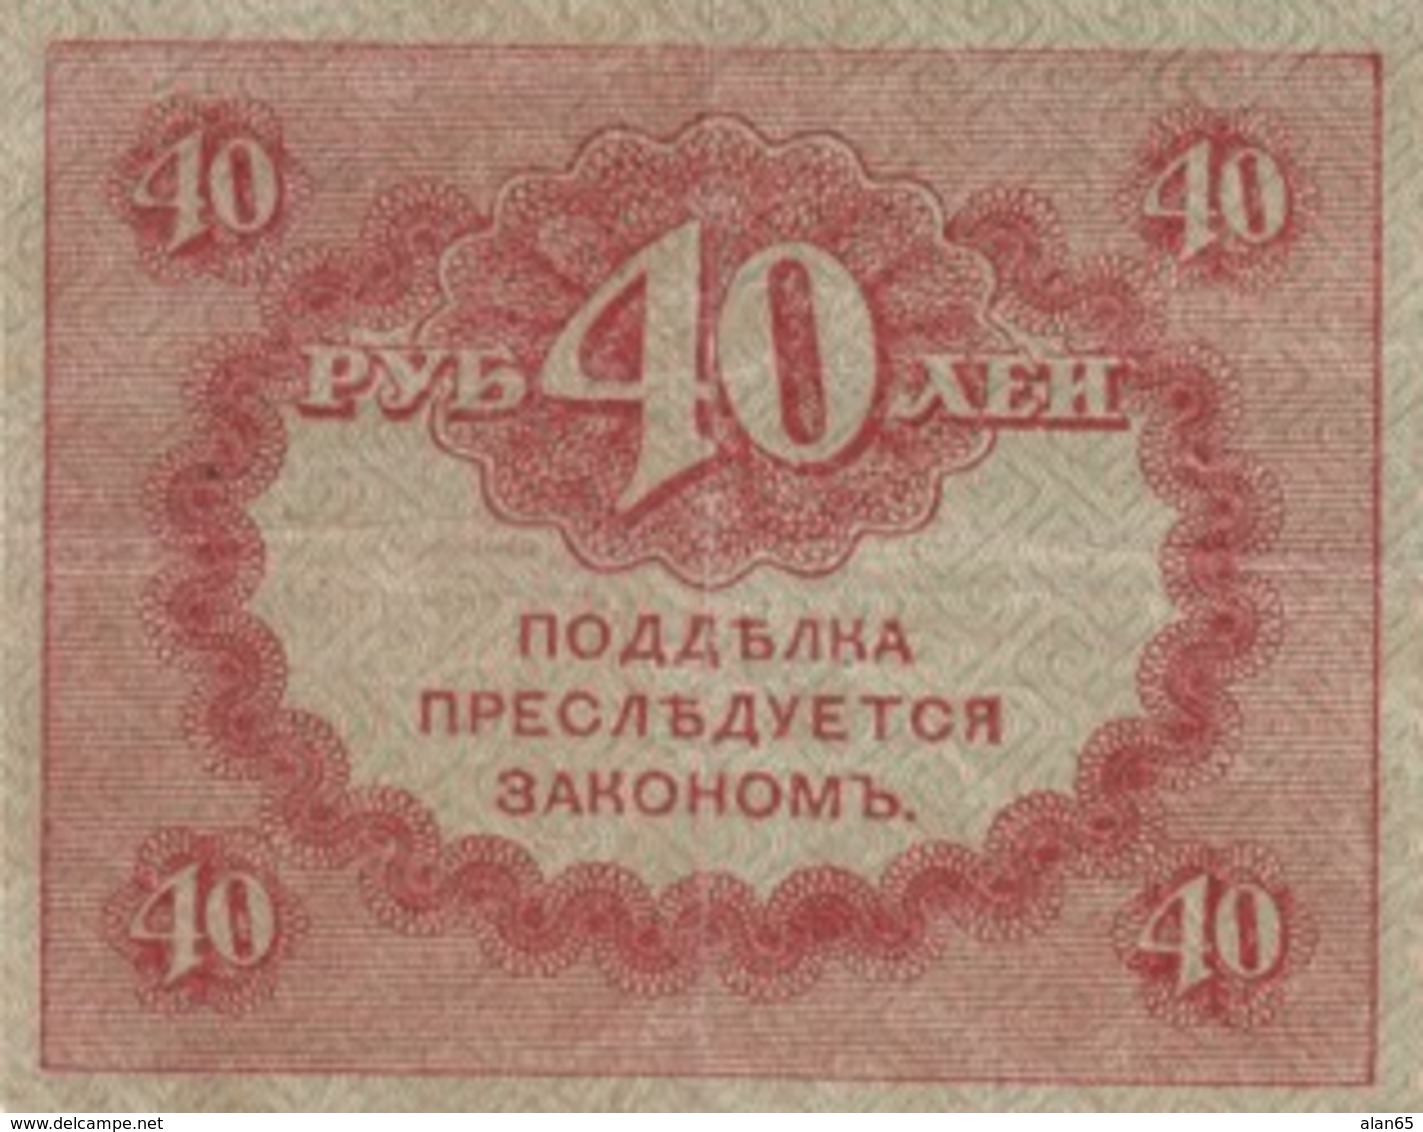 Russia #39, 40 Rubles Treasury Note 4 September 1917 Banknote Currency - Rusland